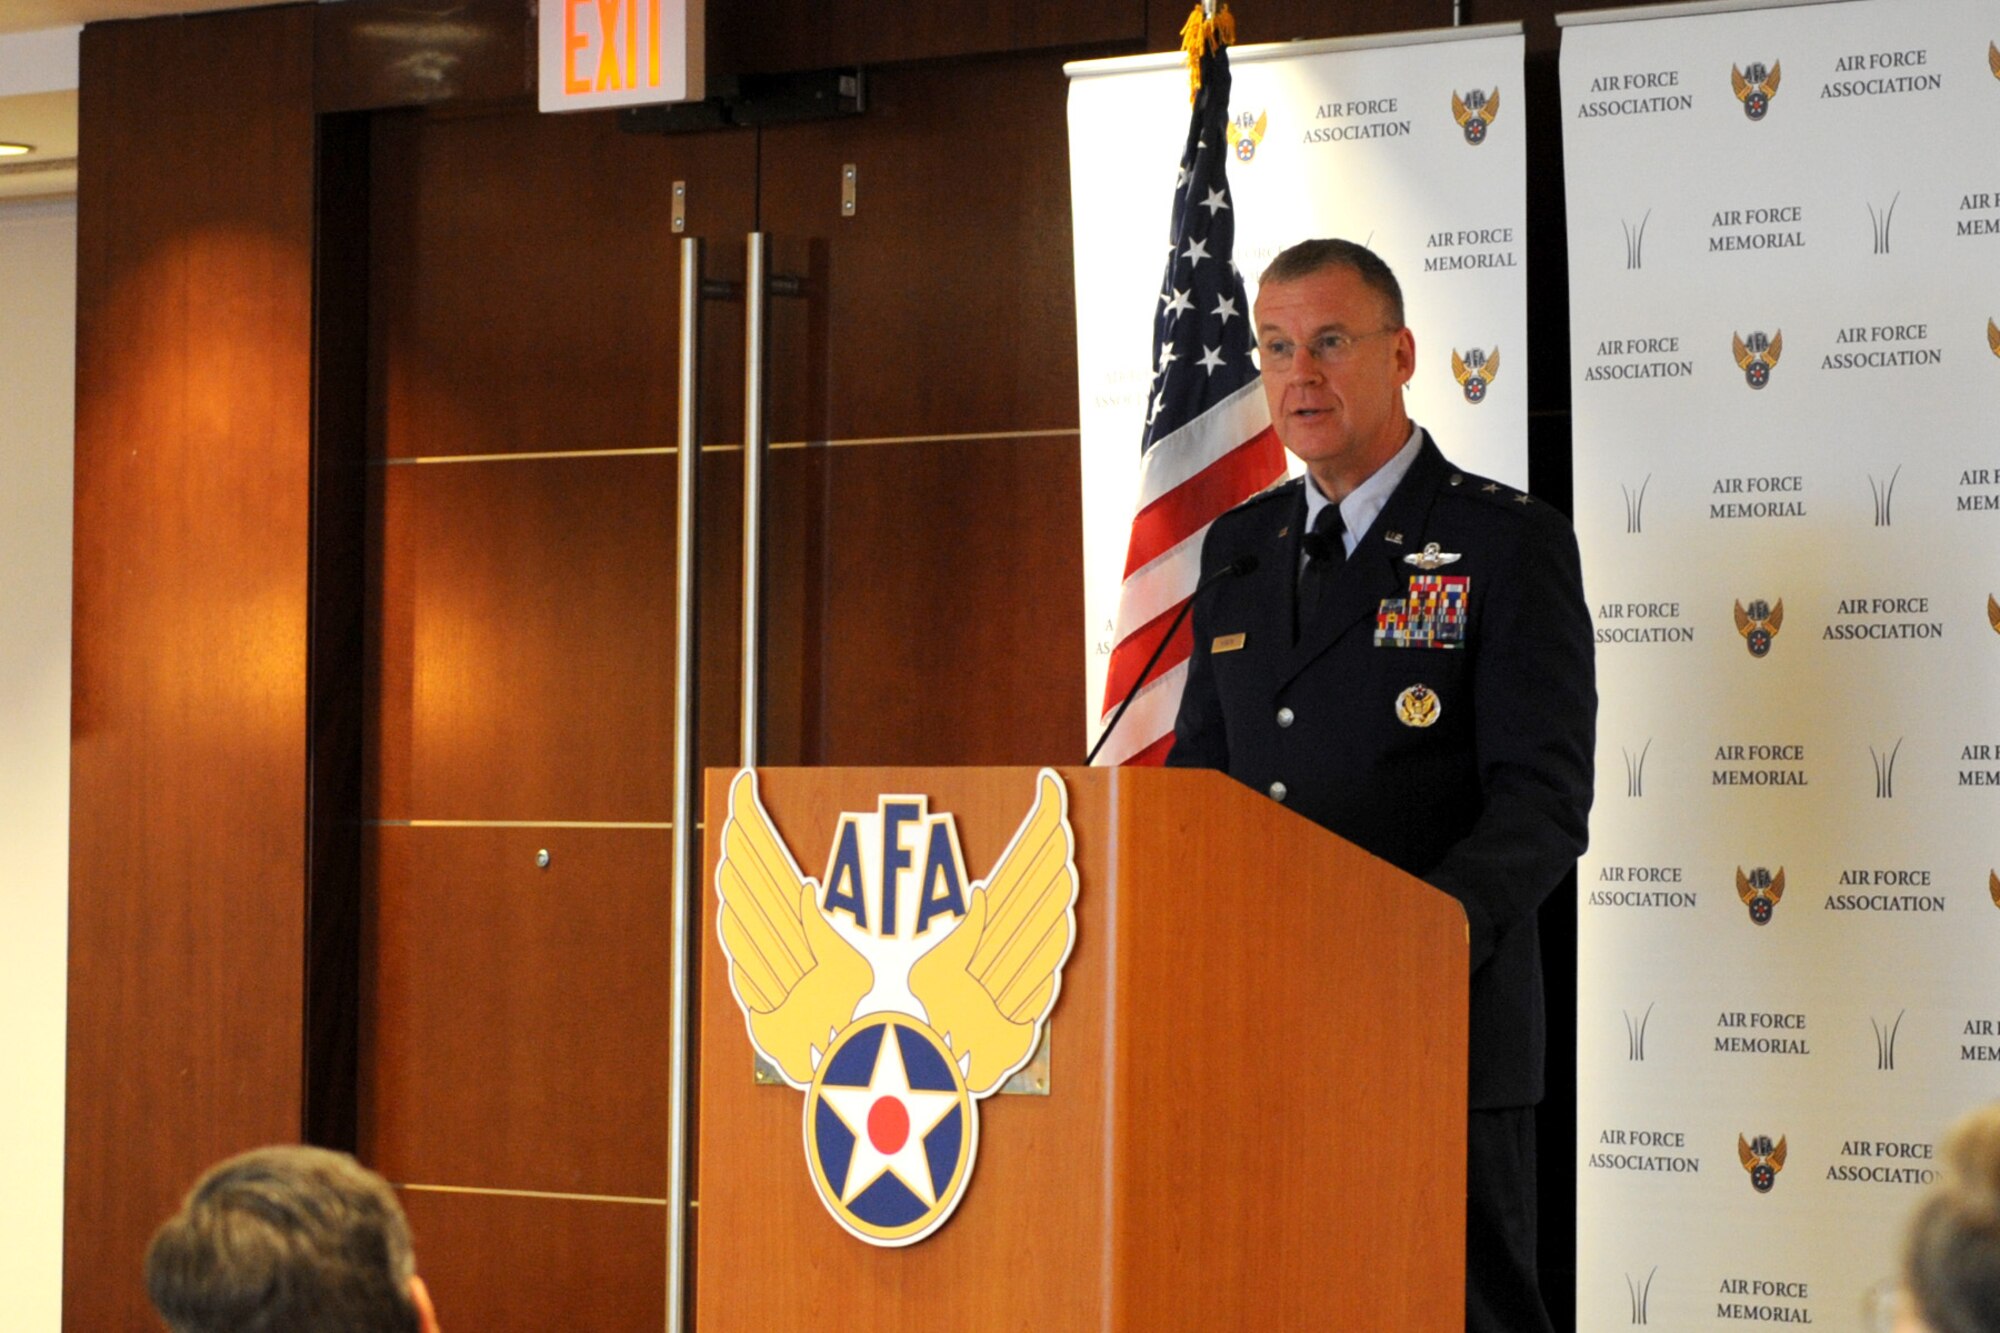 Maj. Gen. Lawrence M. Martin Jr., the assistant deputy under secretary of the Air Force, International Affairs, speaks at a monthly Air Force Association breakfast Nov. 10, 2015, at the Key Bridge Marriott in Arlington, Va. Martin shared why building global air force partnerships through integrating political-military relationships, security assistance, technology and information disclosure issues ensures relationships endure. (U.S. Air Force photo/Tech. Sgt. Torri Hendrix)